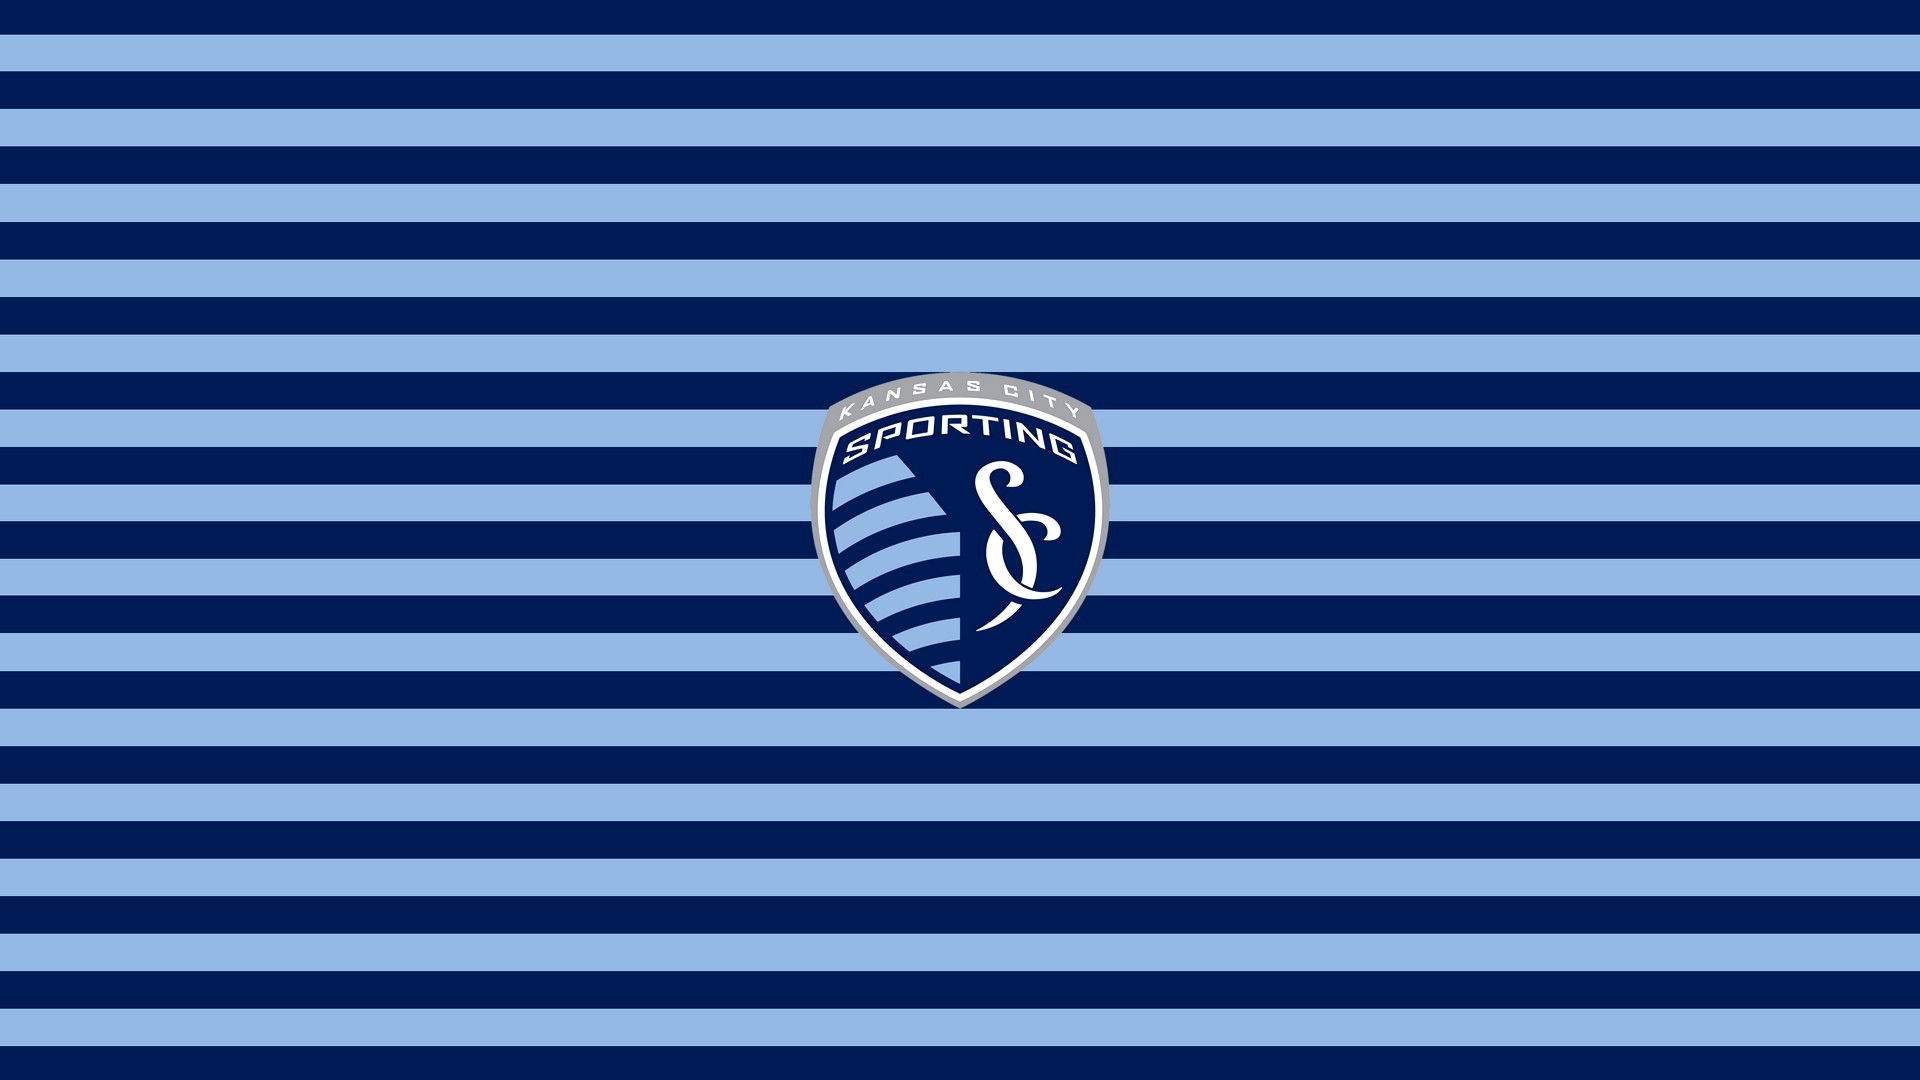 HD Backgrounds Sporting Kansas City With high-resolution 1920X1080 pixel. You can use this wallpaper for your Desktop Computers, Mac Screensavers, Windows Backgrounds, iPhone Wallpapers, Tablet or Android Lock screen and another Mobile device